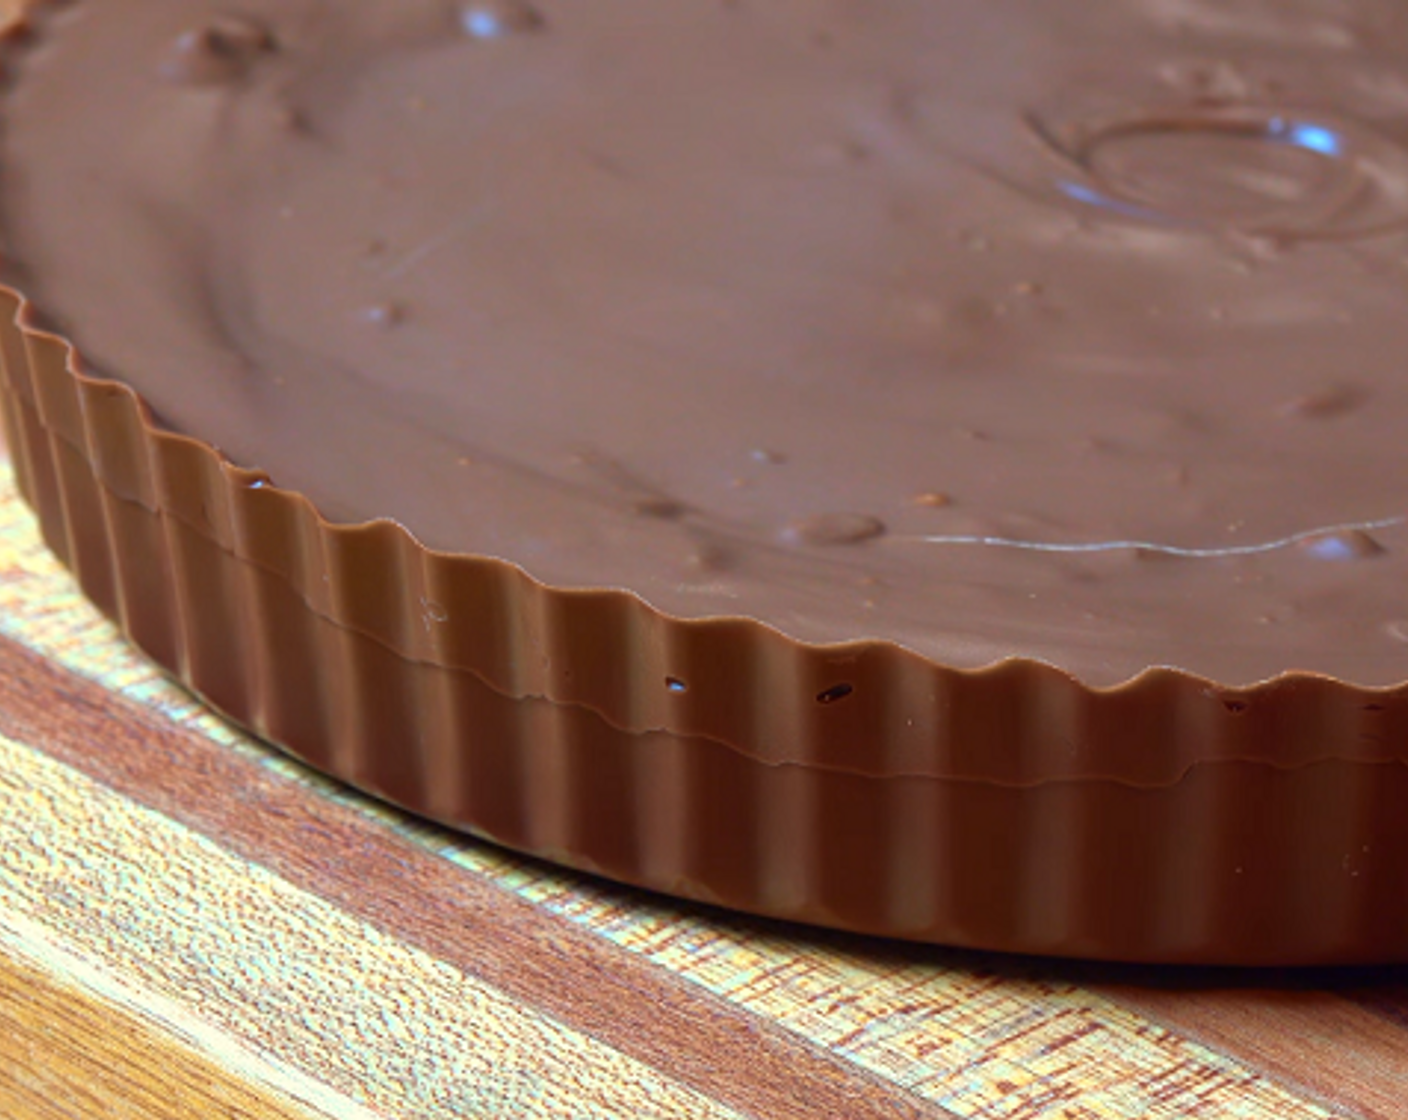 Giant Chocolate Peanut Butter Cup